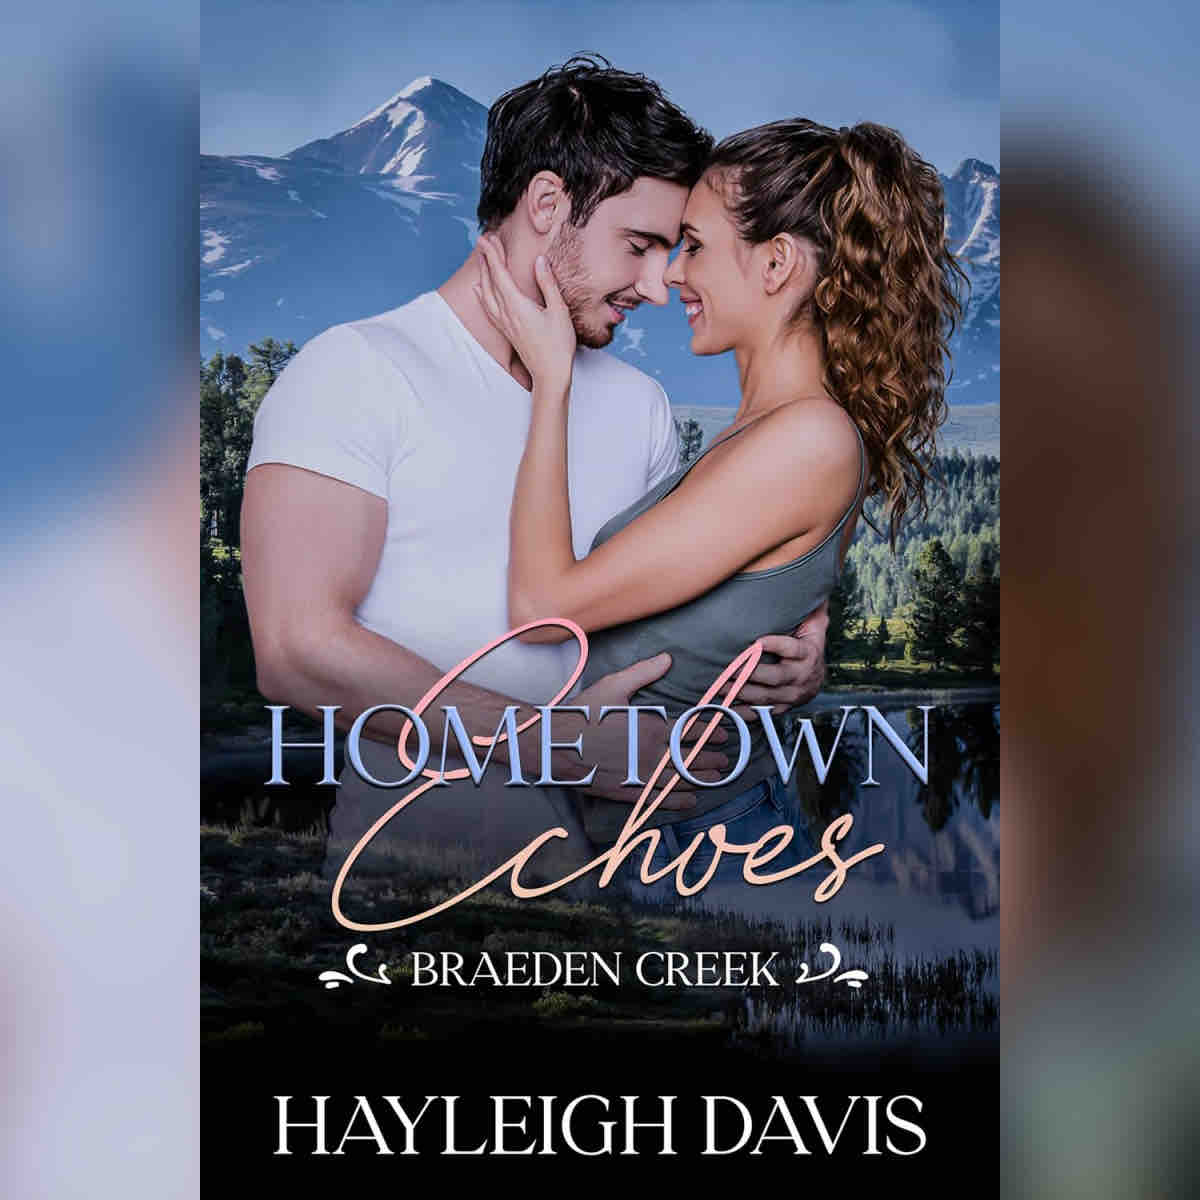 SMALL TOWN ROMANCE FANS: HEADS UP!
Hometown Echoes is sweet, spicy, and suspenseful. 

Universal: geni.us/HometownEchoes

#smalltownromance #brothersbestfriend #steamyreads #kissingbooks #books #readers #booklovers #frominhere 

@1852media